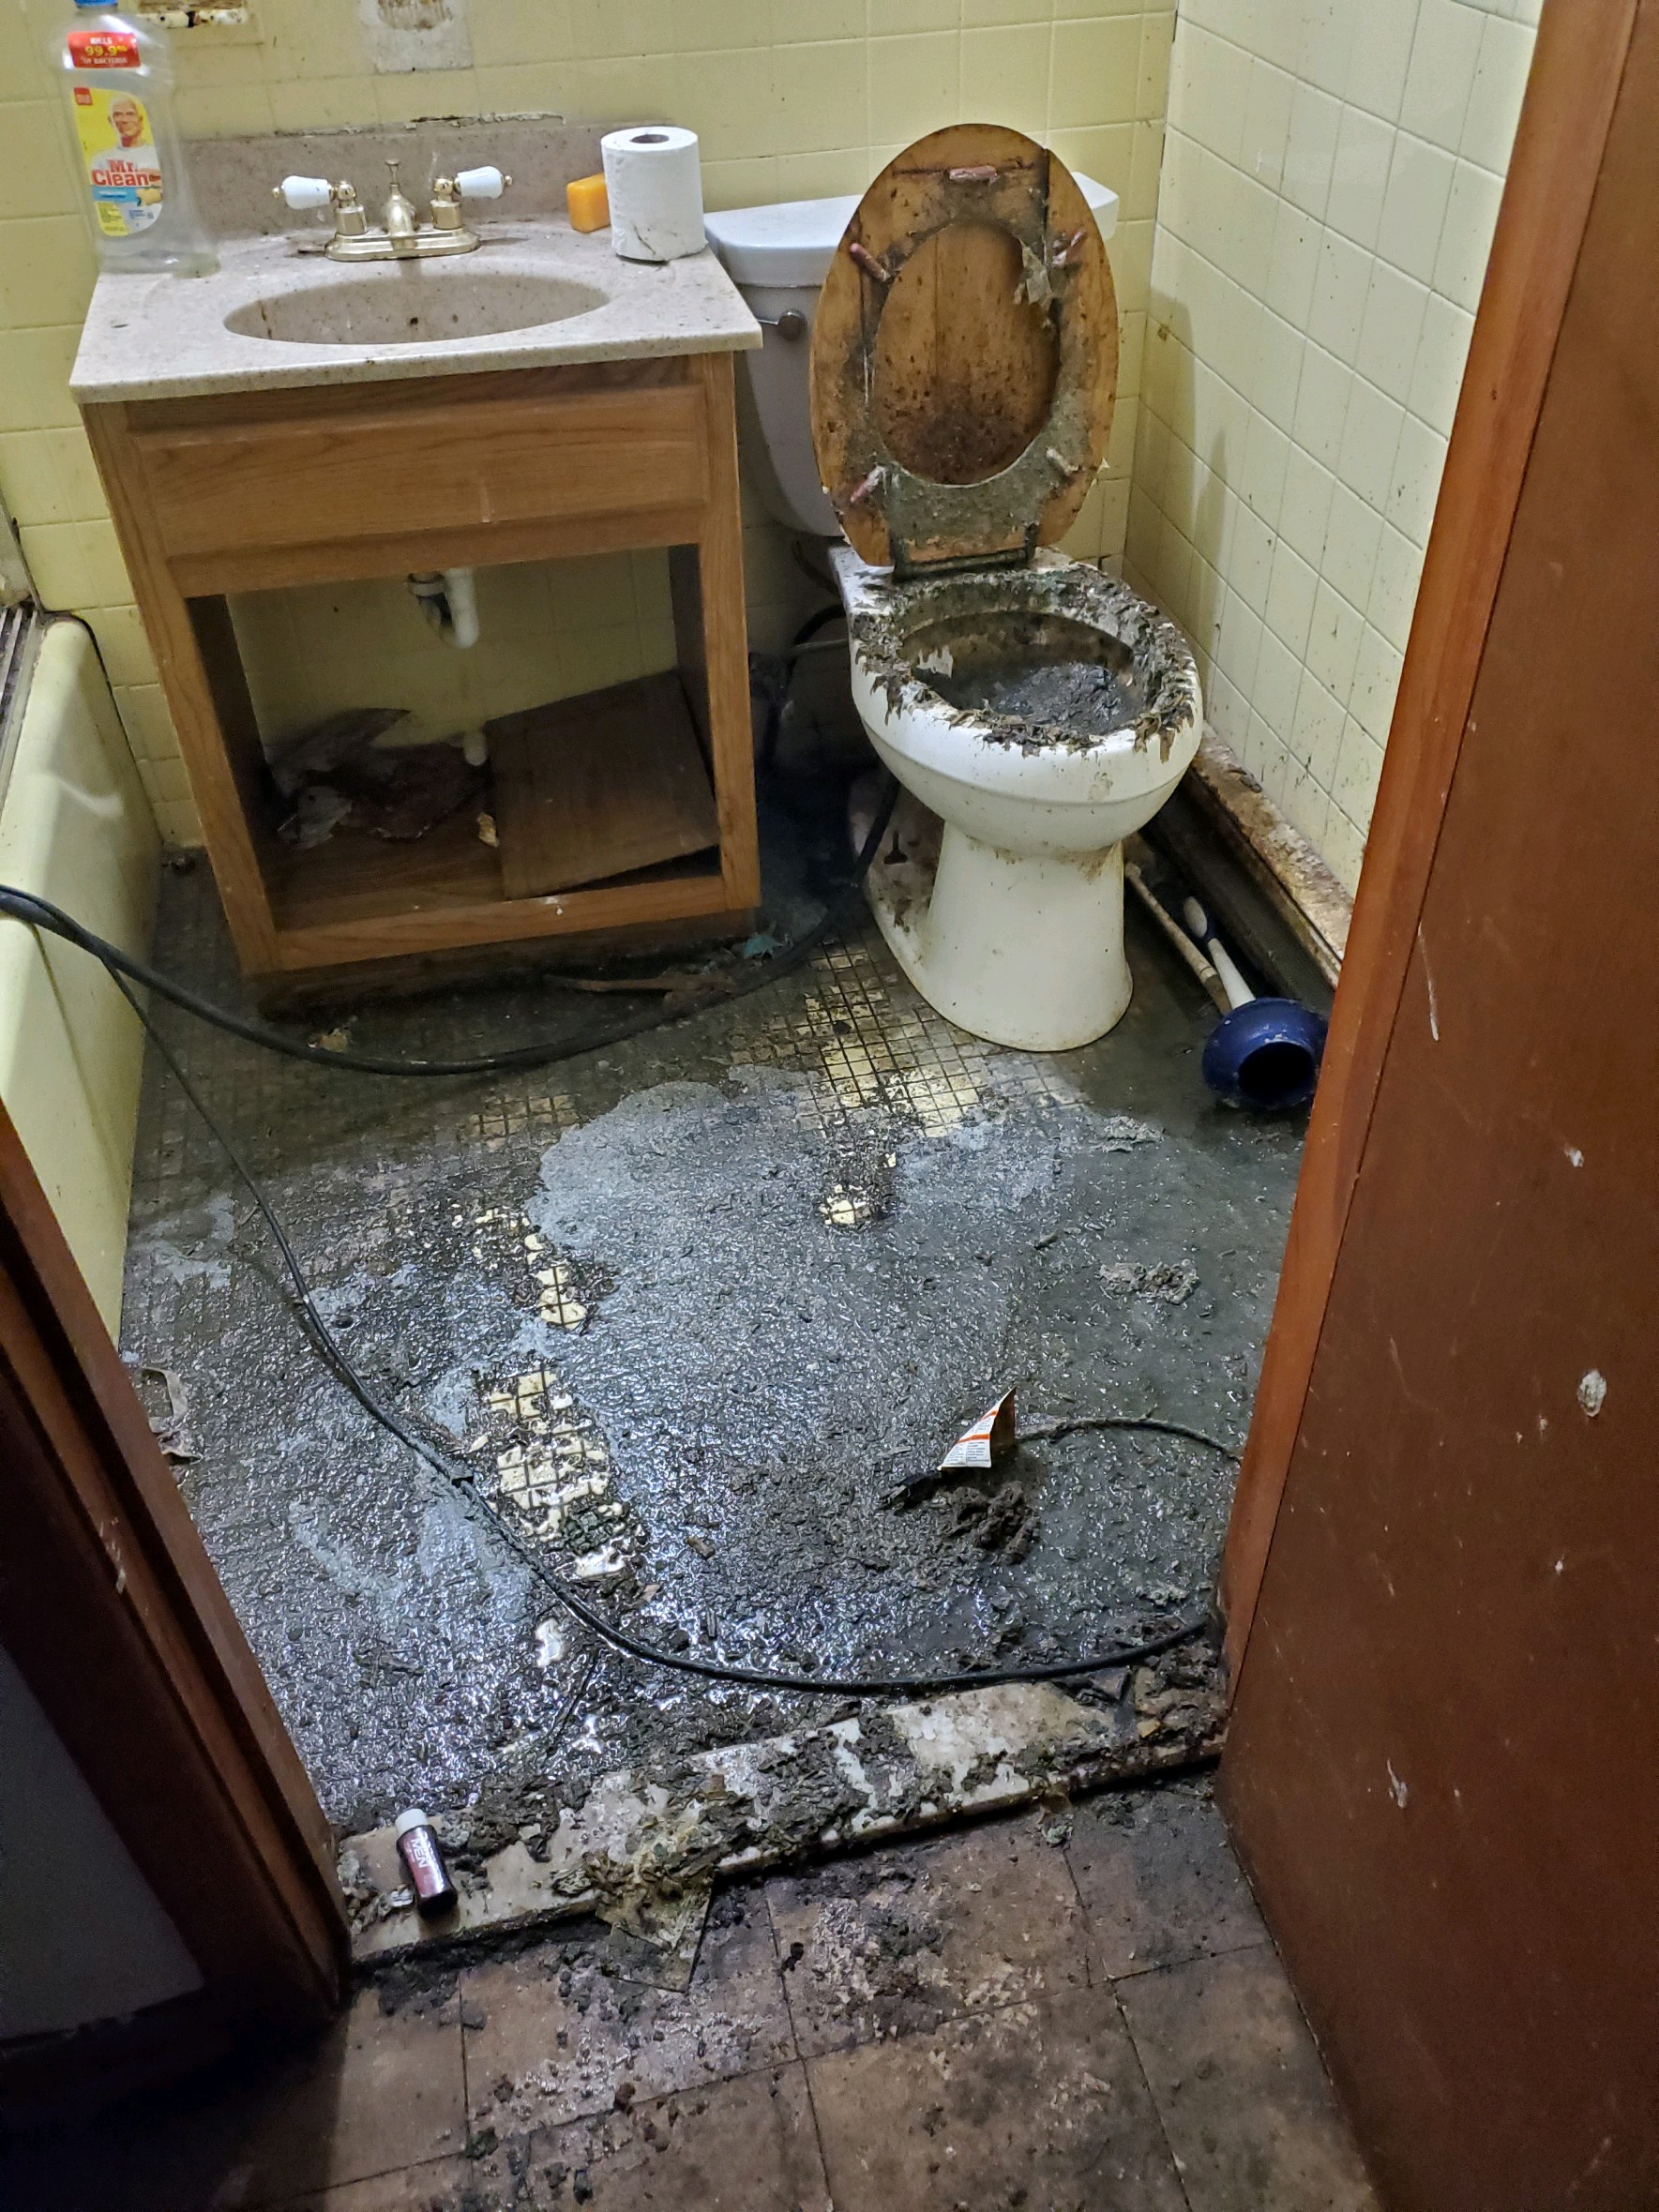 Toilet Overflow sewage cleanup in Bronxville, NY